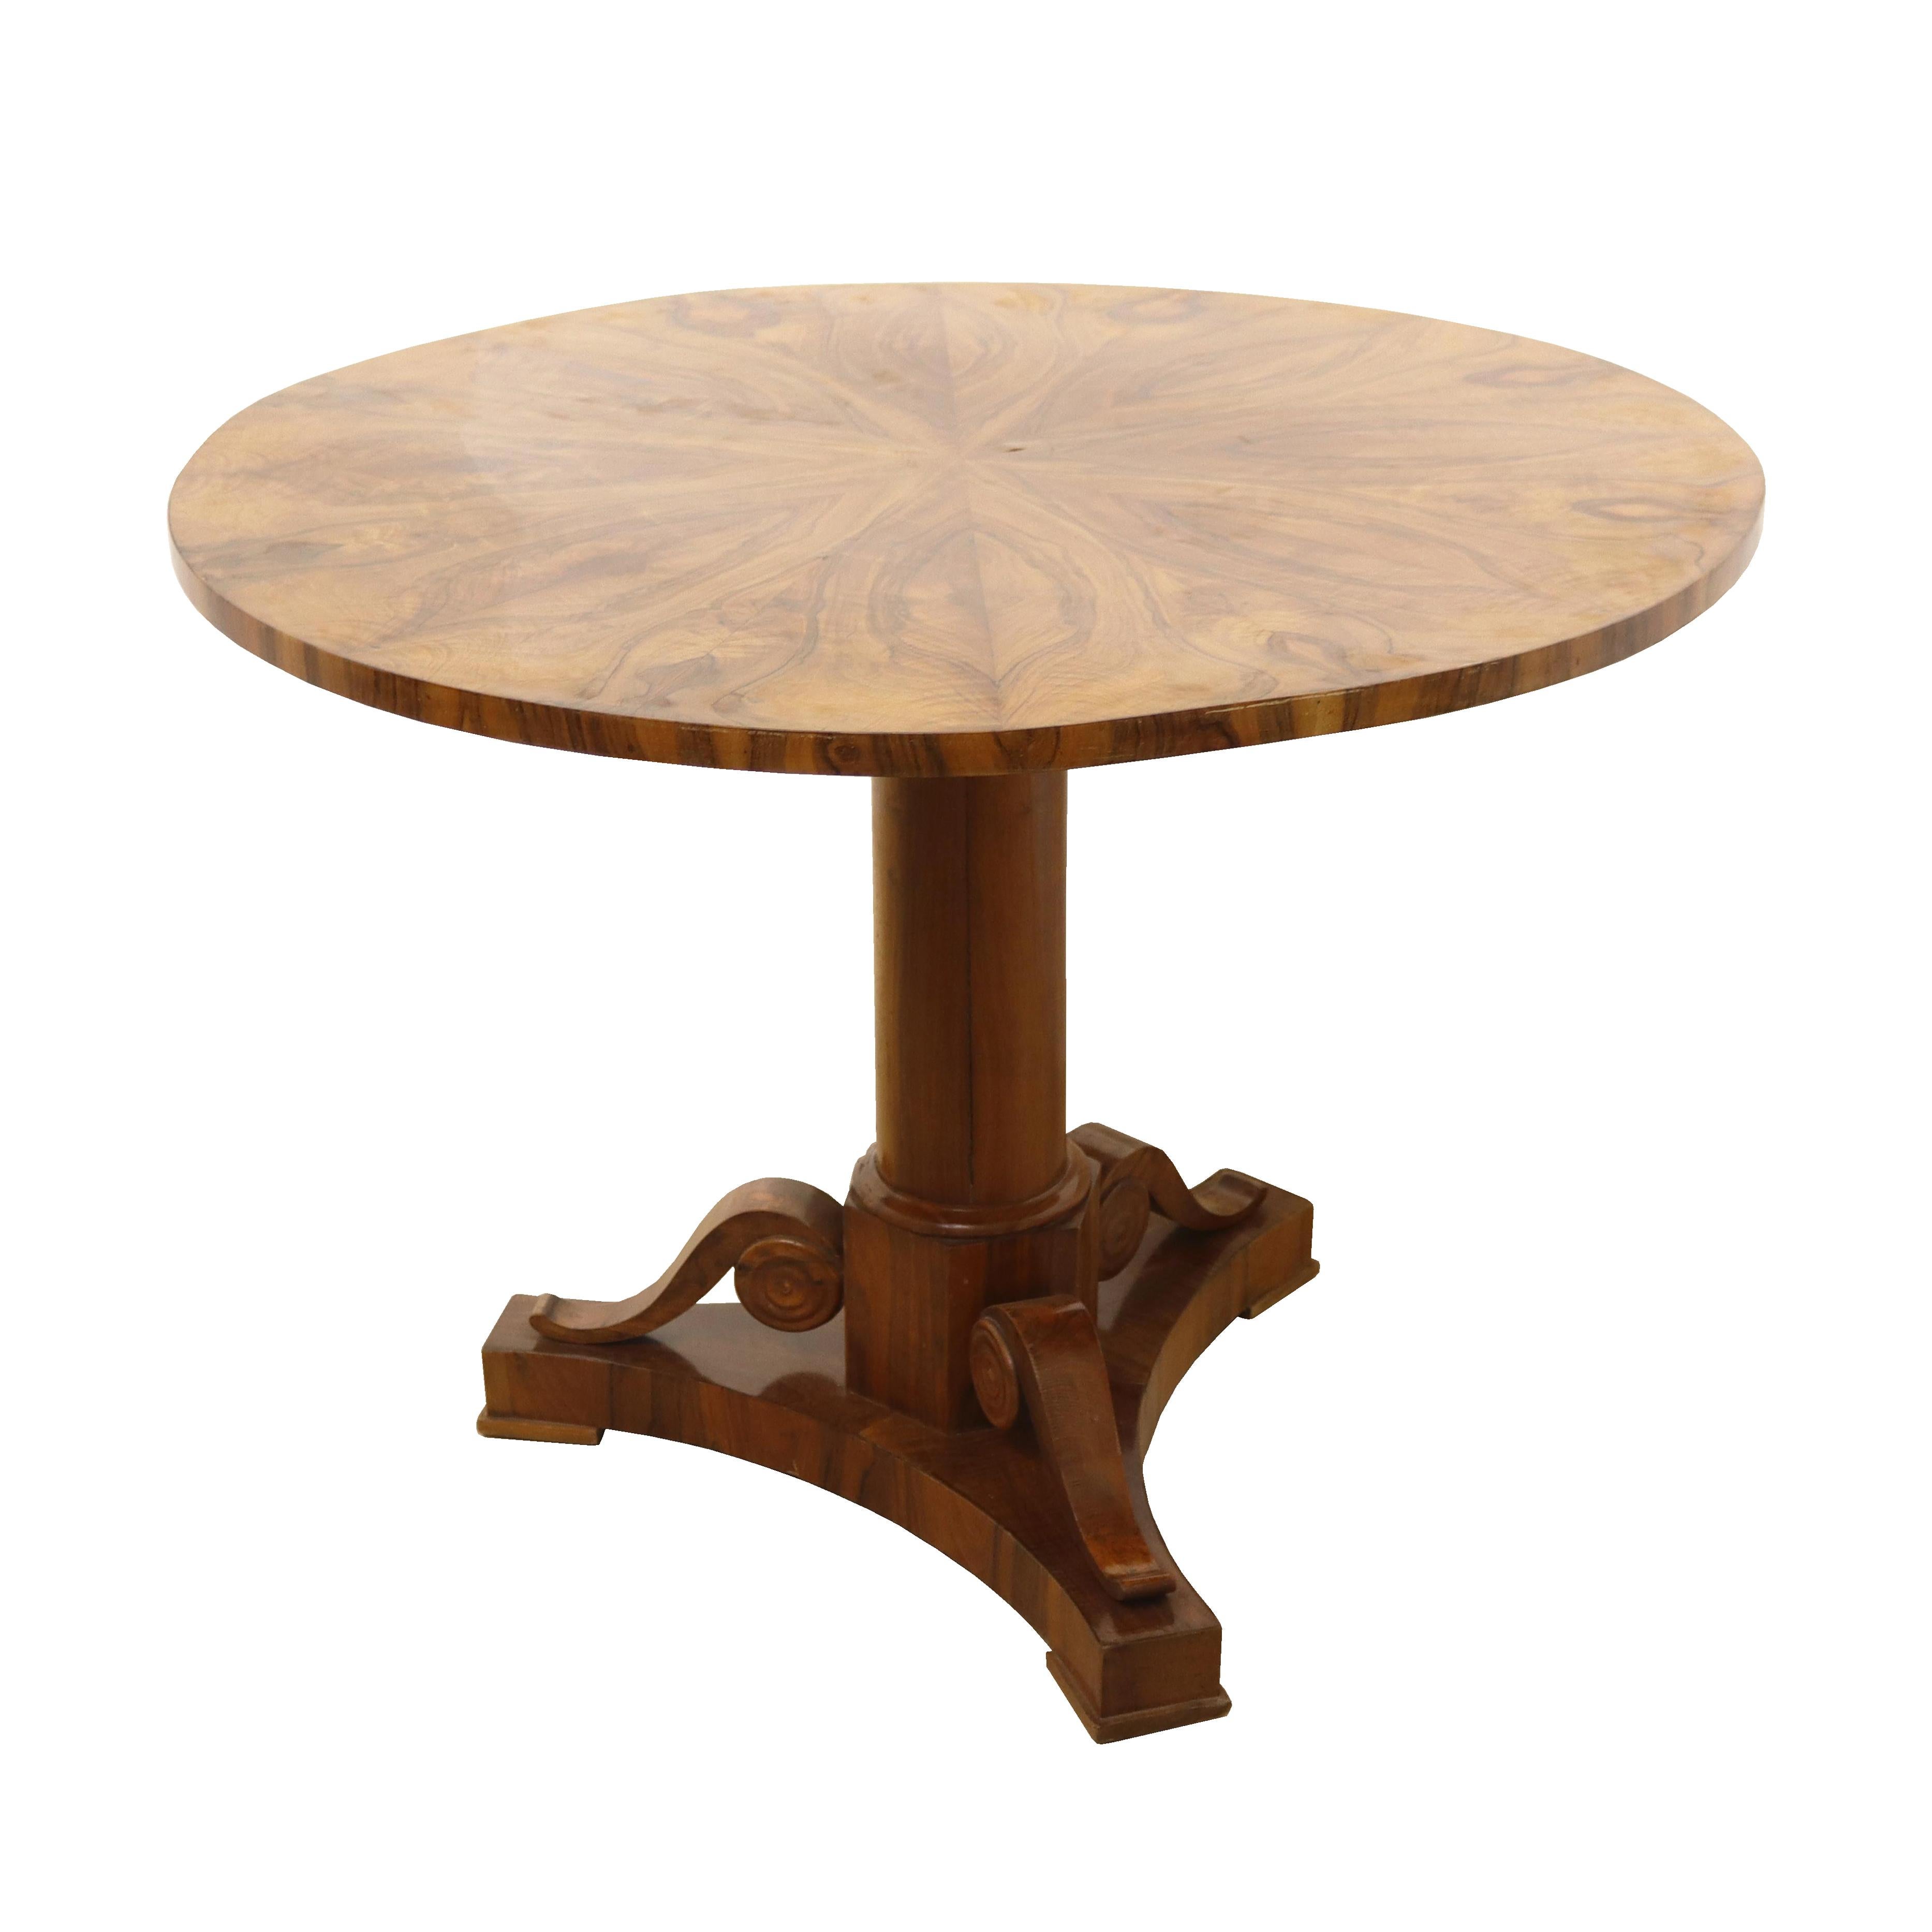 Hello,
This exceptional Biedermeier walnut pedestal table was made in Vienna, c. 1825.

Viennese Biedermeier is distinguished by their sophisticated proportions, rare and refined design and excellent craftsmanship and continue to have a great